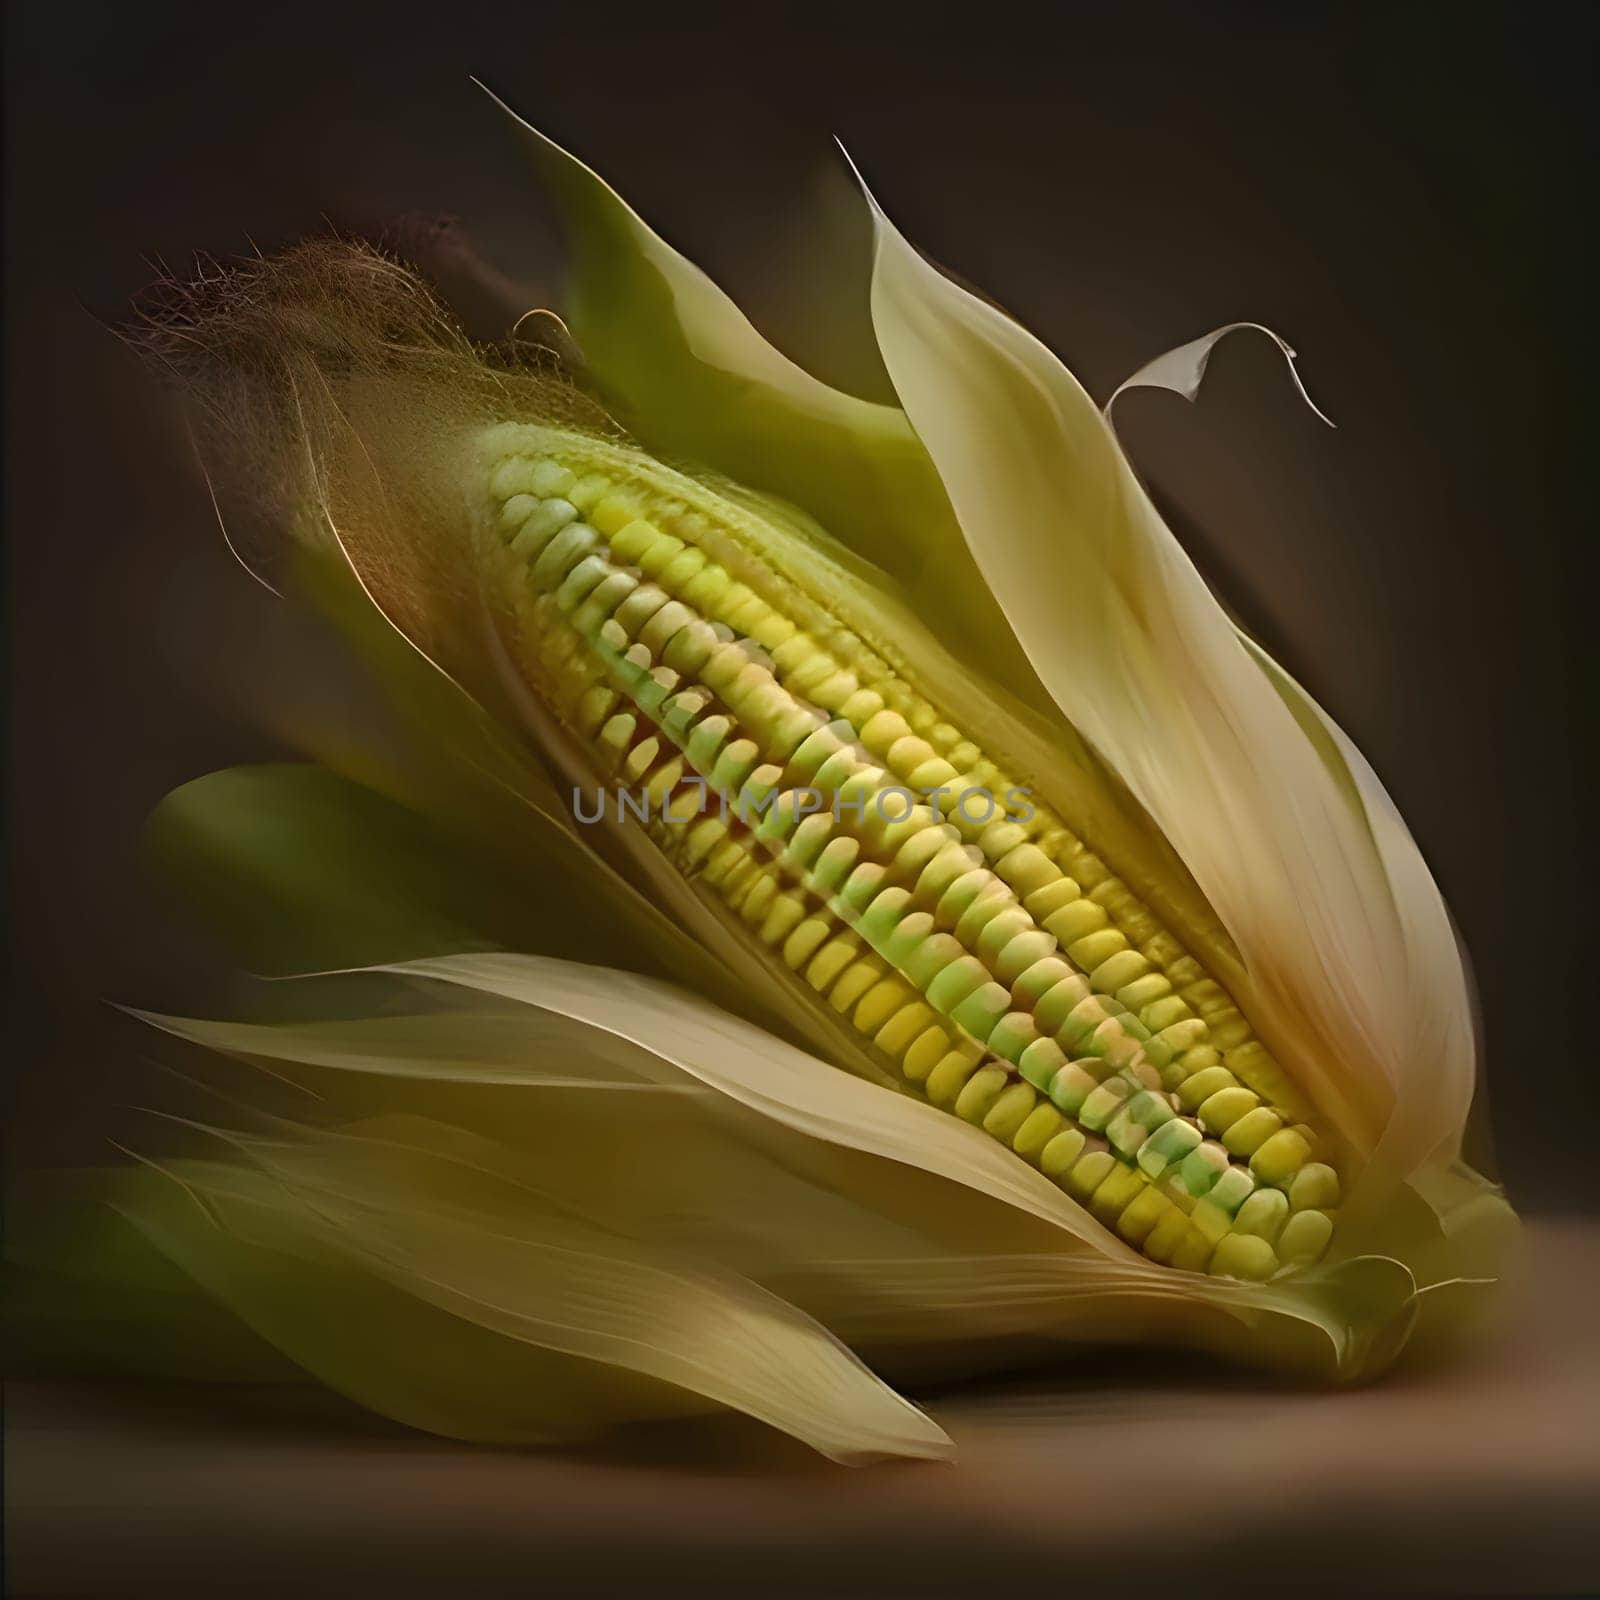 Yellow corn cob in Green leaves, dark background. Corn as a dish of thanksgiving for the harvest. by ThemesS